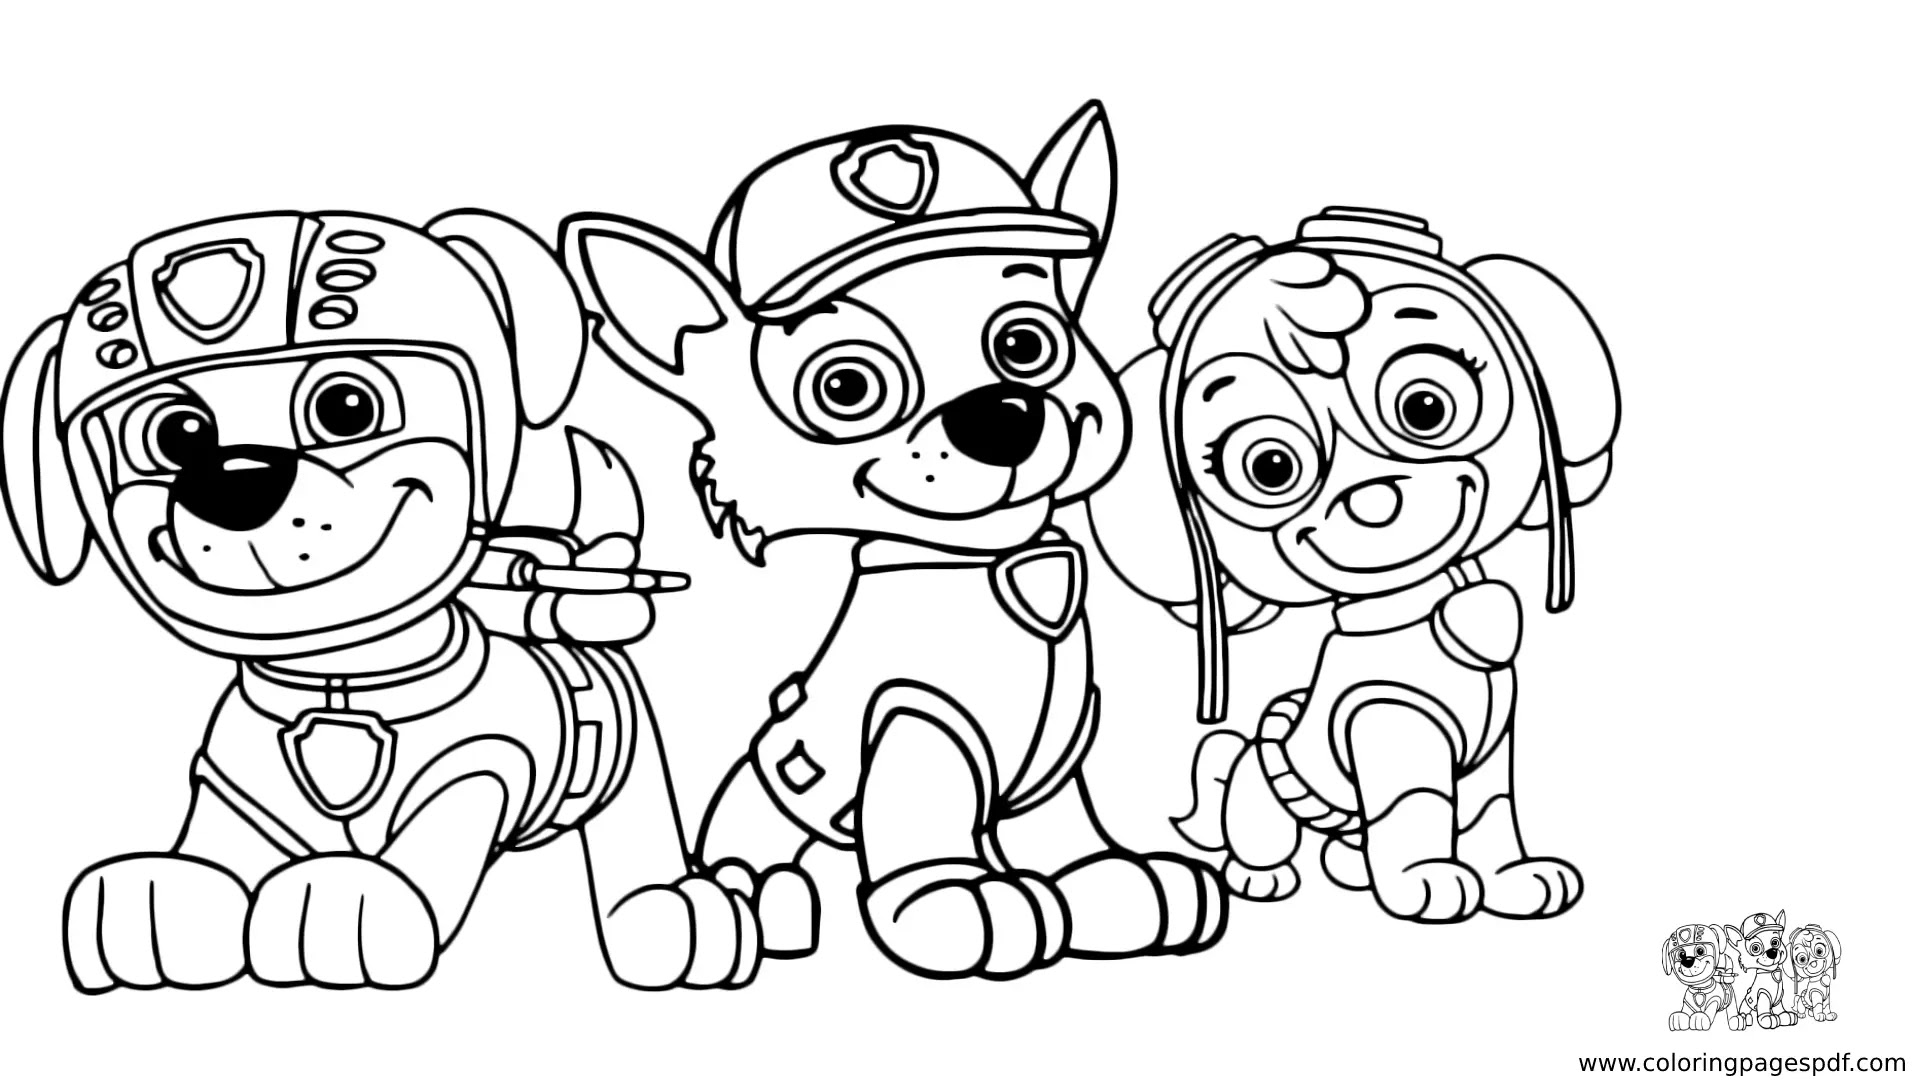 Coloring Pages Of Zuma, Chase, And Skye